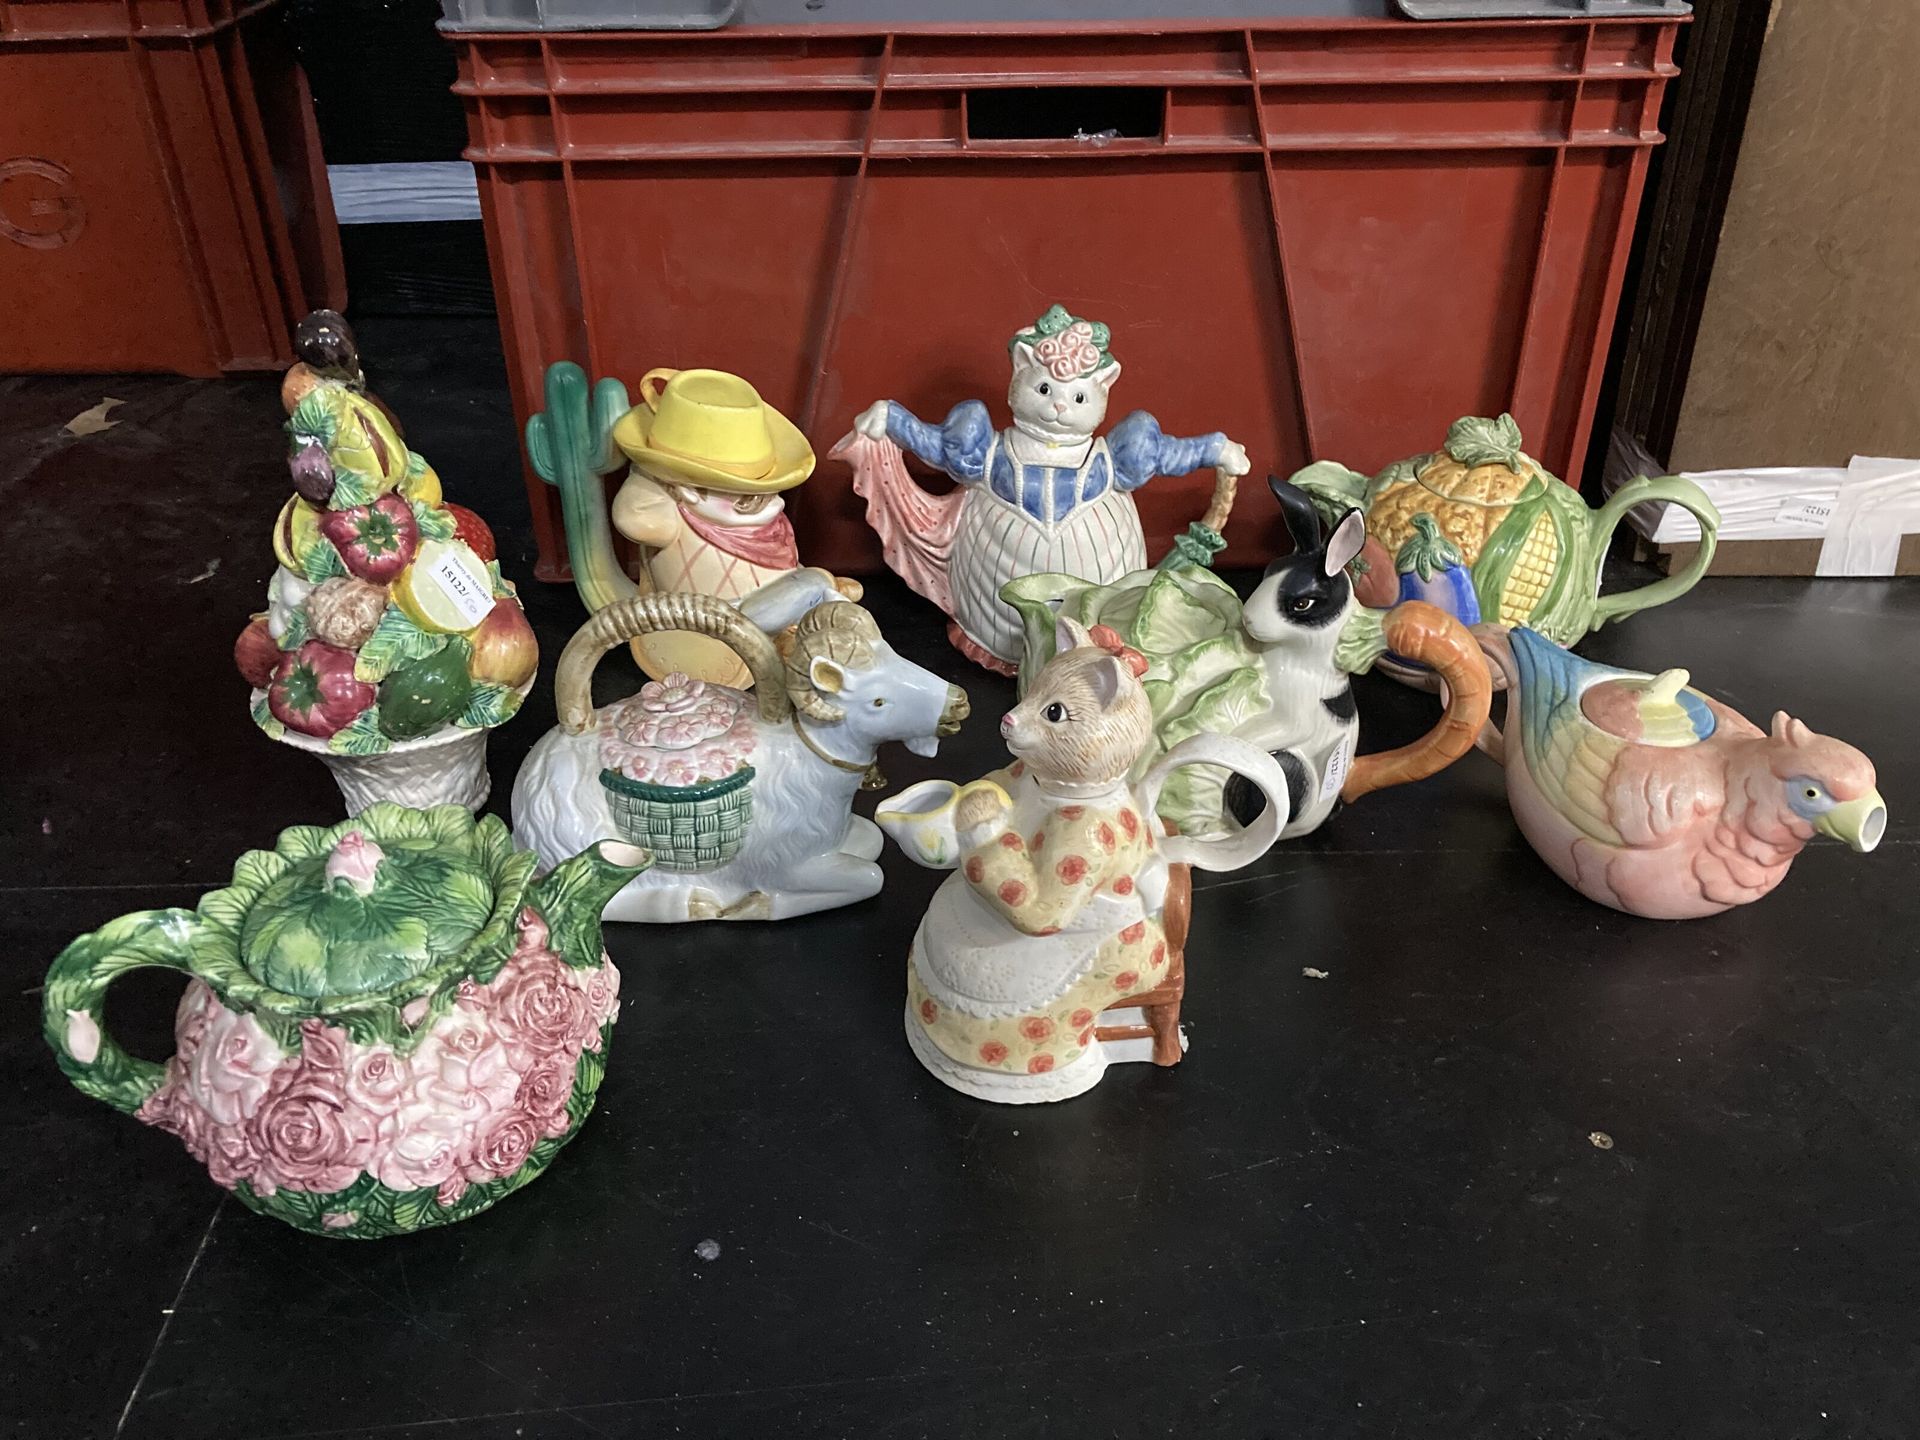 Null Lot of teapots with animal decoration and fruits and vegetables

sold as is